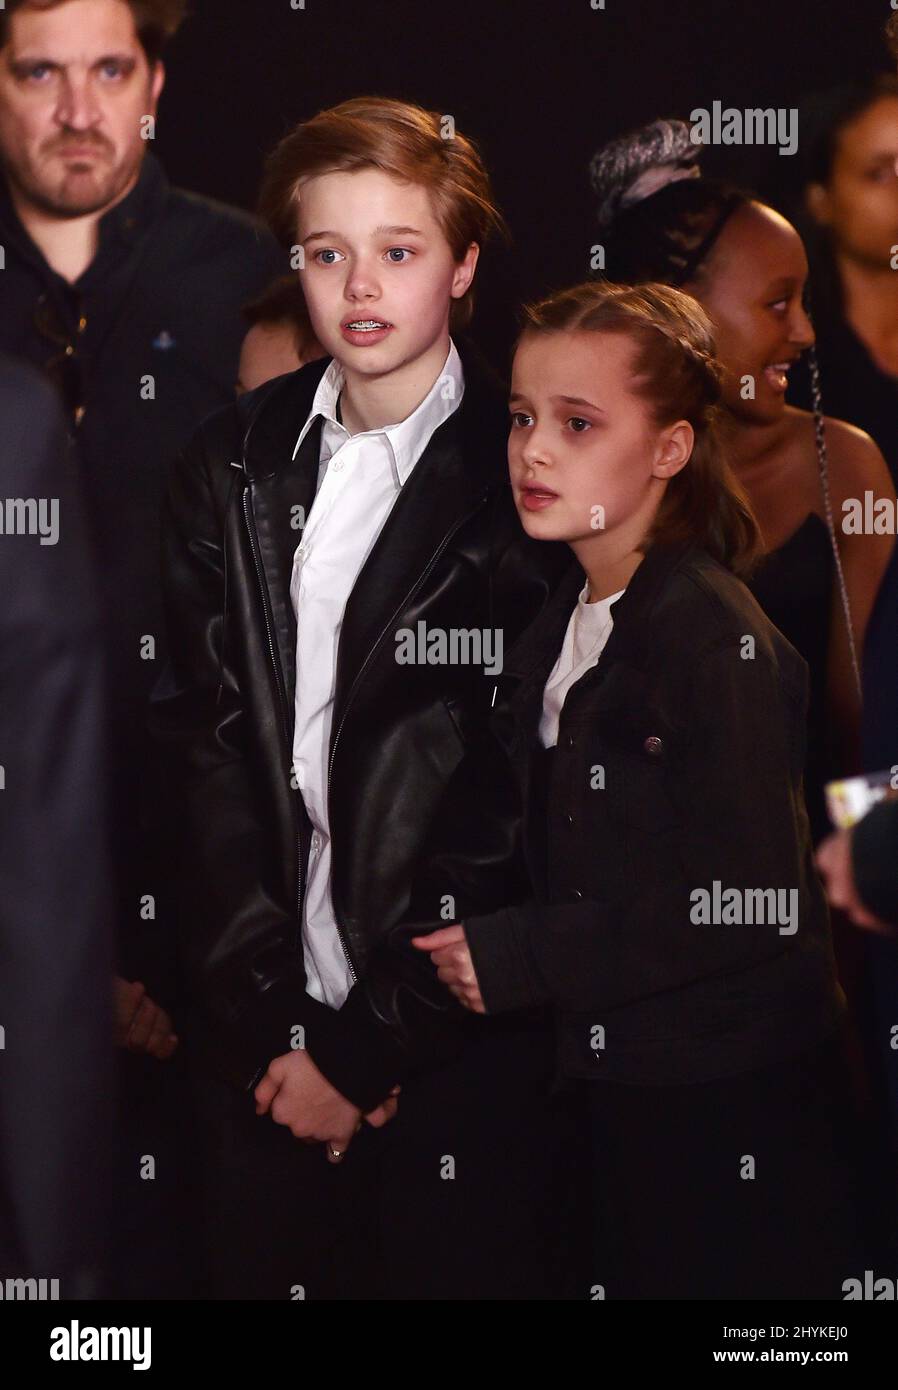 Shiloh Jolie-Pitt at the world premiere of 'Maleficent: Mistress of Evil' held at the El Capitan Theatre on September 30, 2019 in Hollywood, CA. Stock Photo